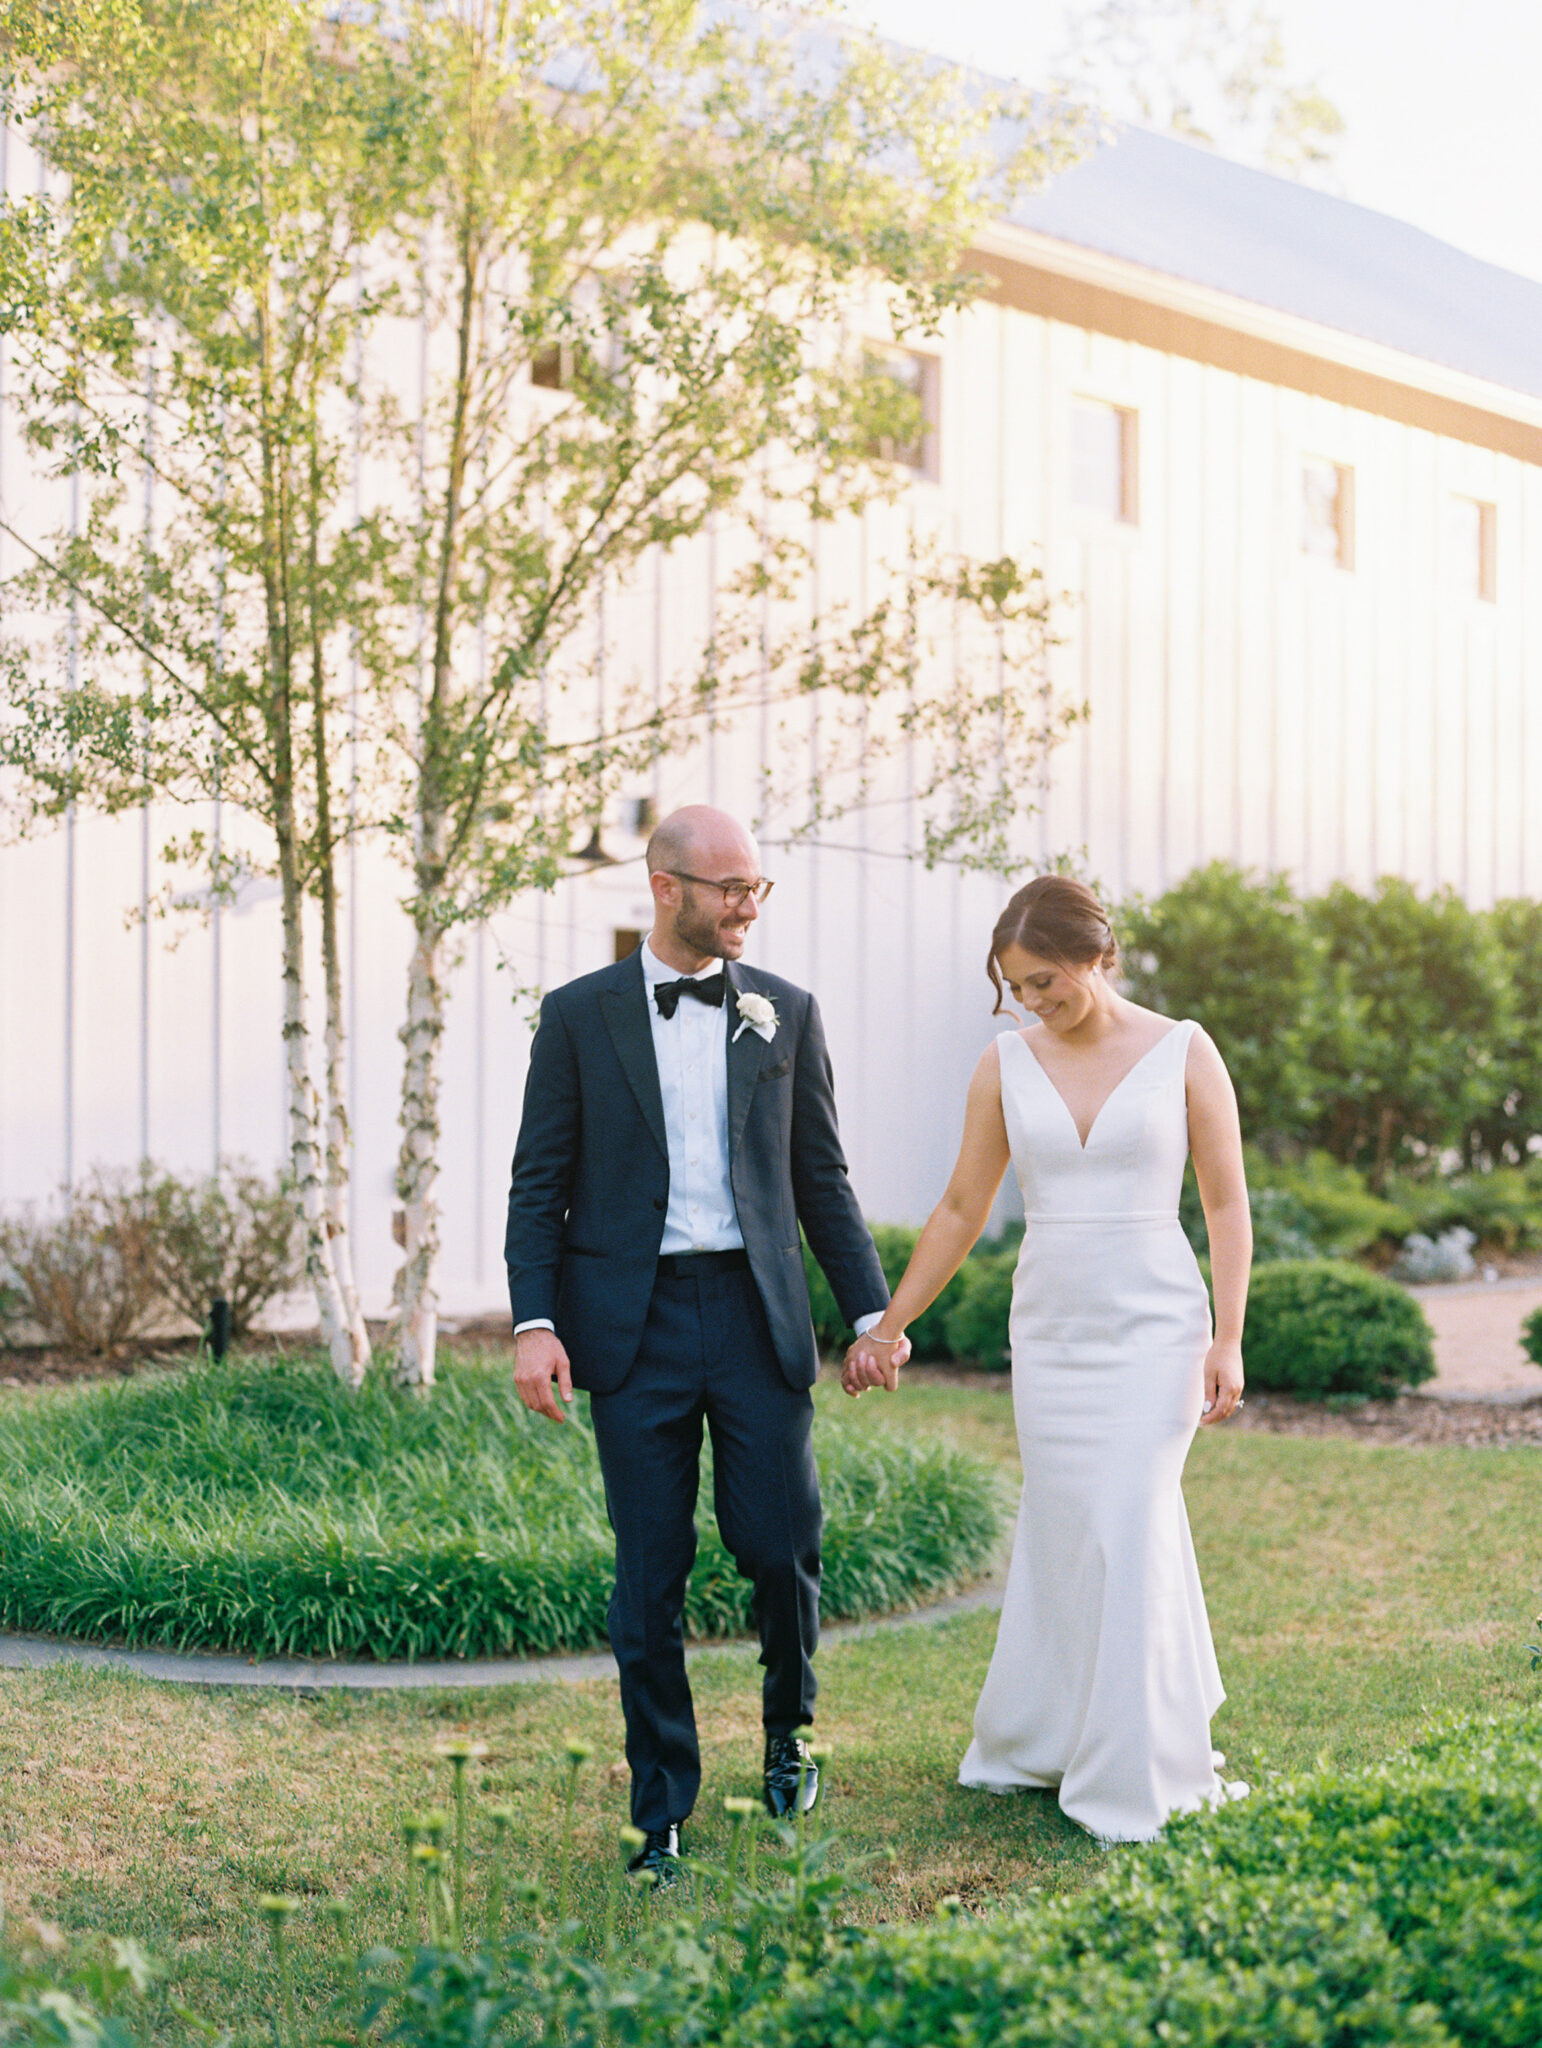 Kathryn and Evan's White and Blue Wedding - Barn of Chapel Hill ...